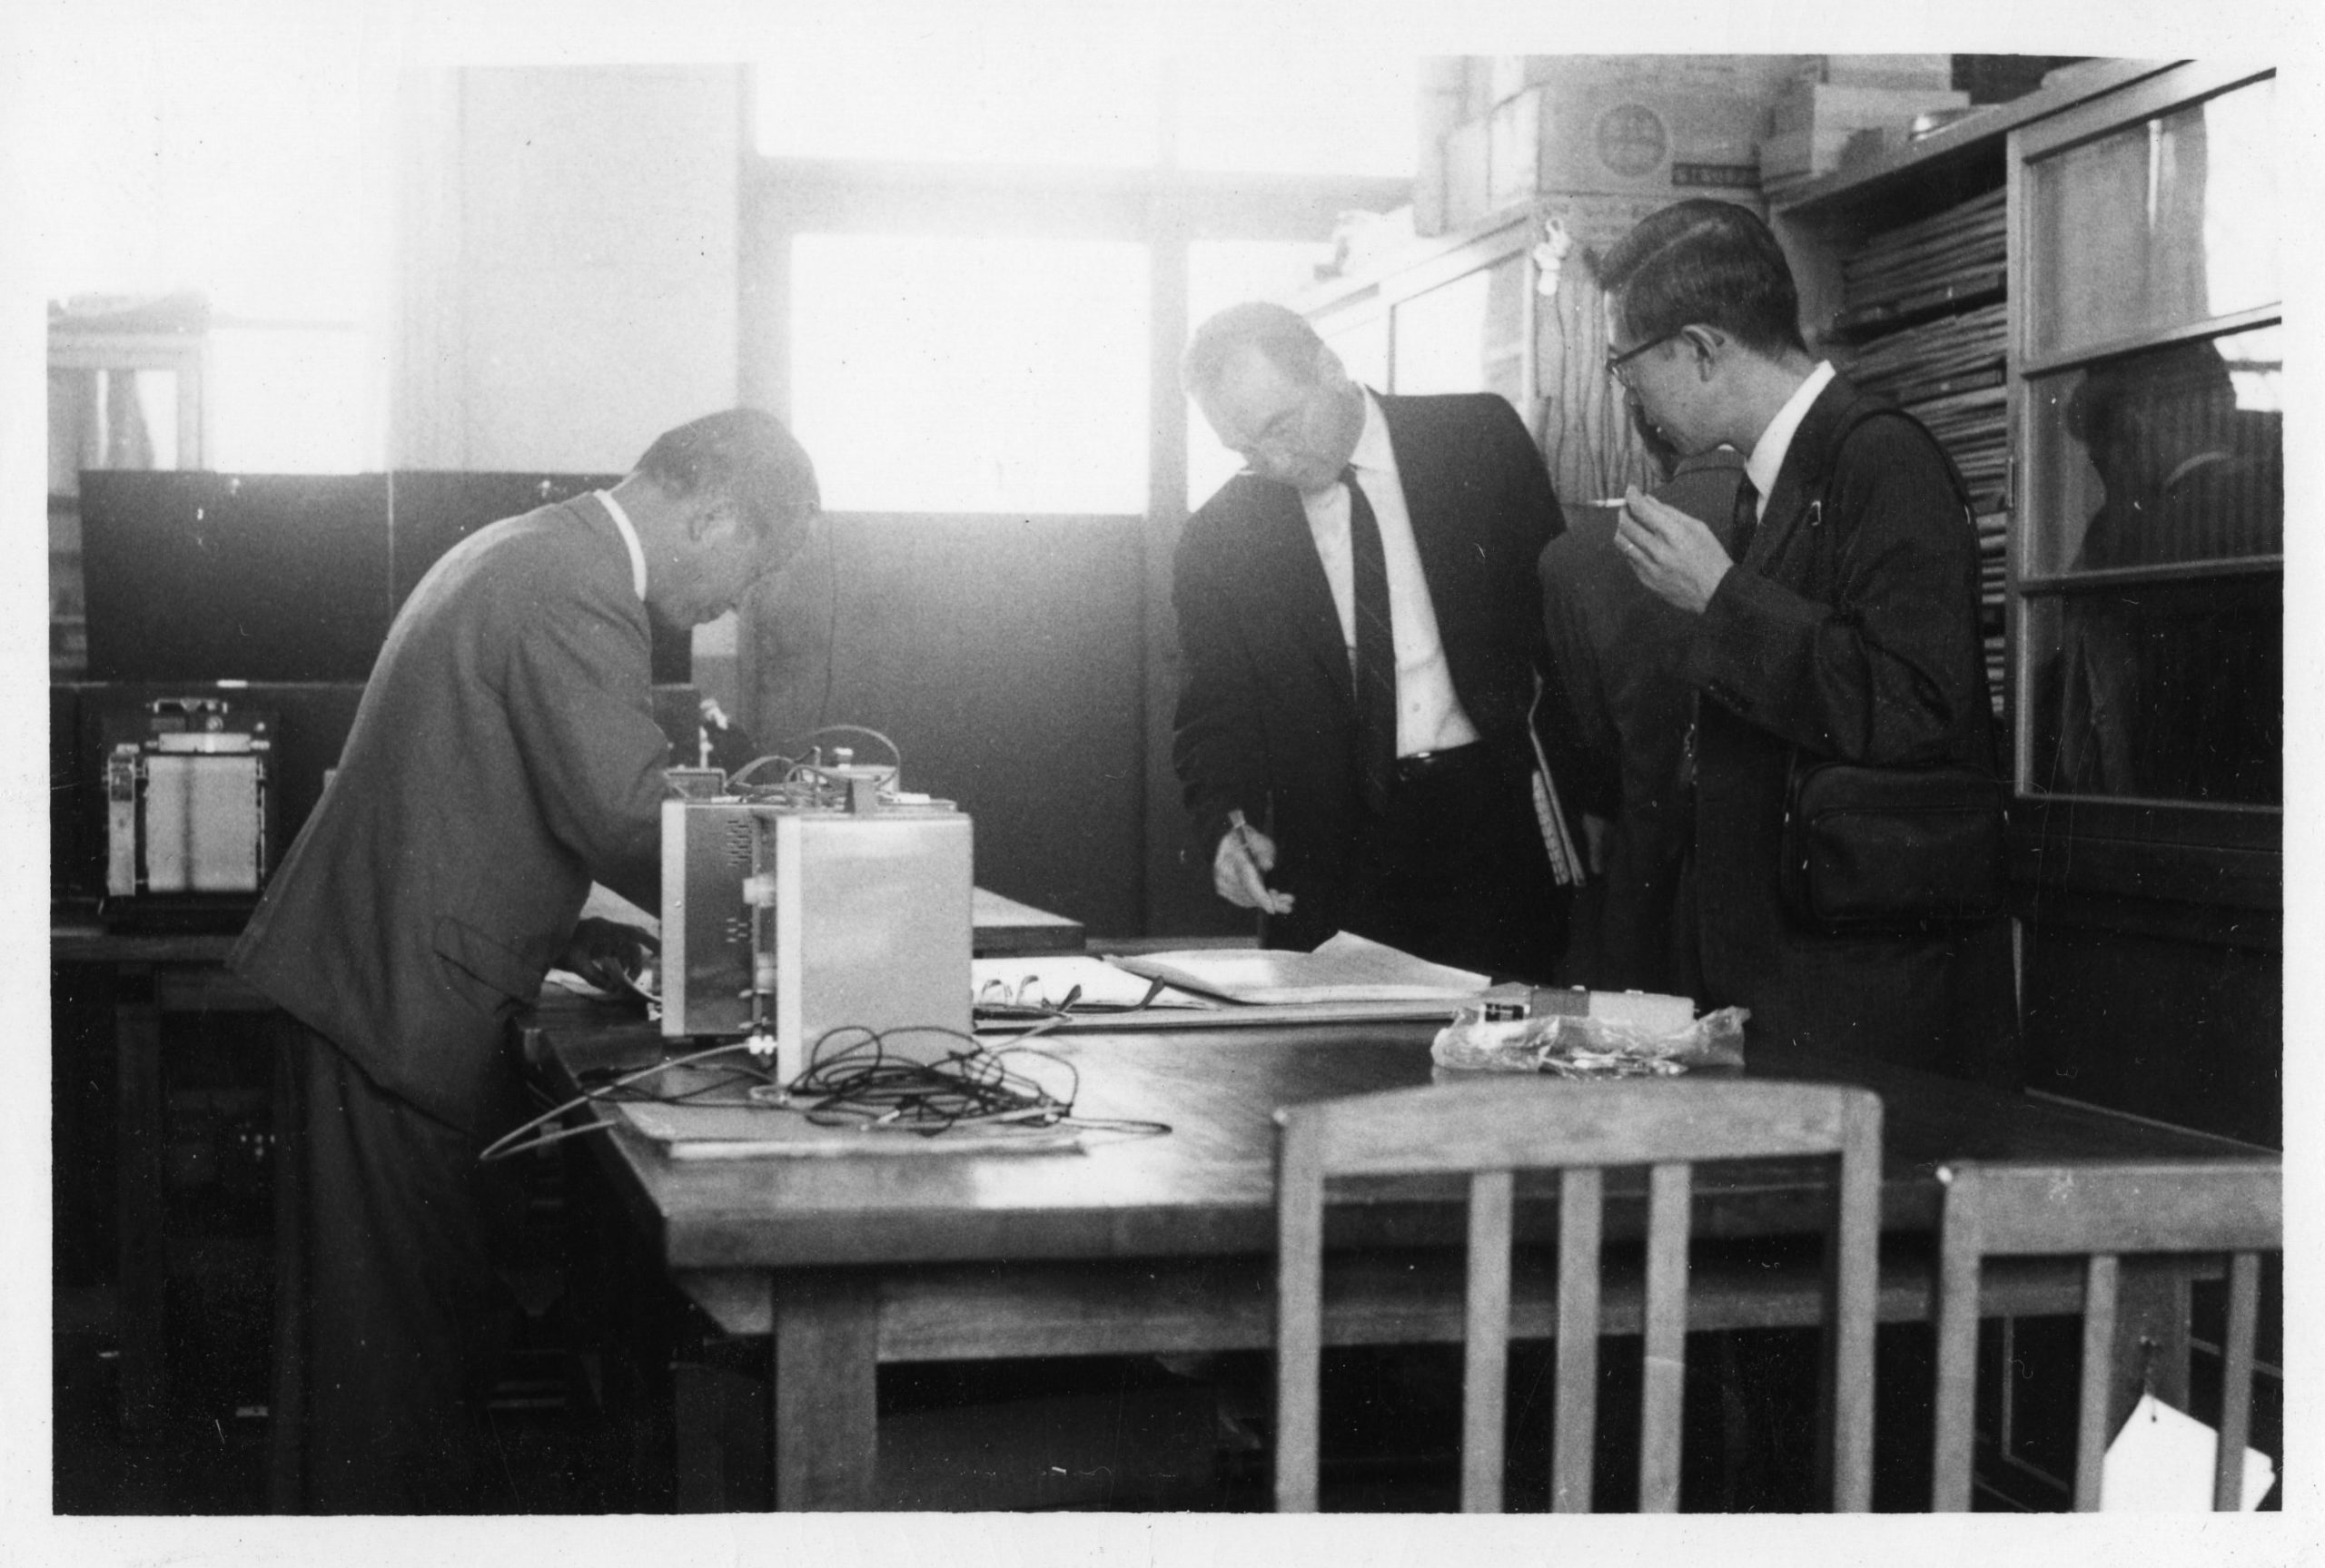 Black and white photograph of Walter Orr Roberts, I.M. Pei, and two other people during the planning stages for the Mesa Laboratory building